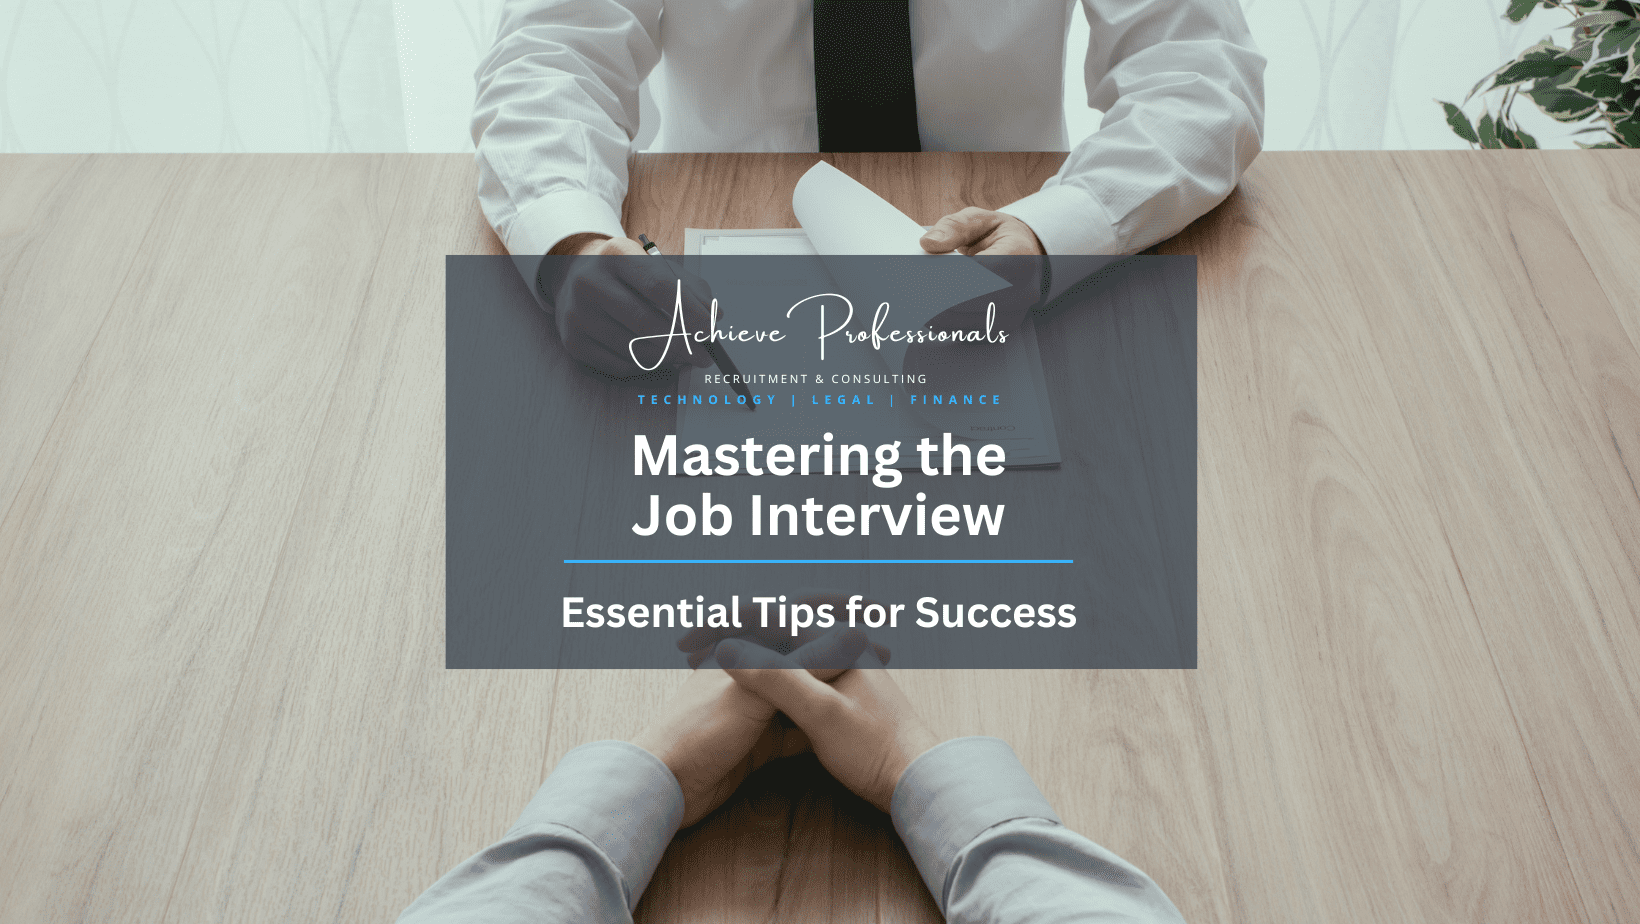 Mastering the Job Interview - Essential Tips for Success